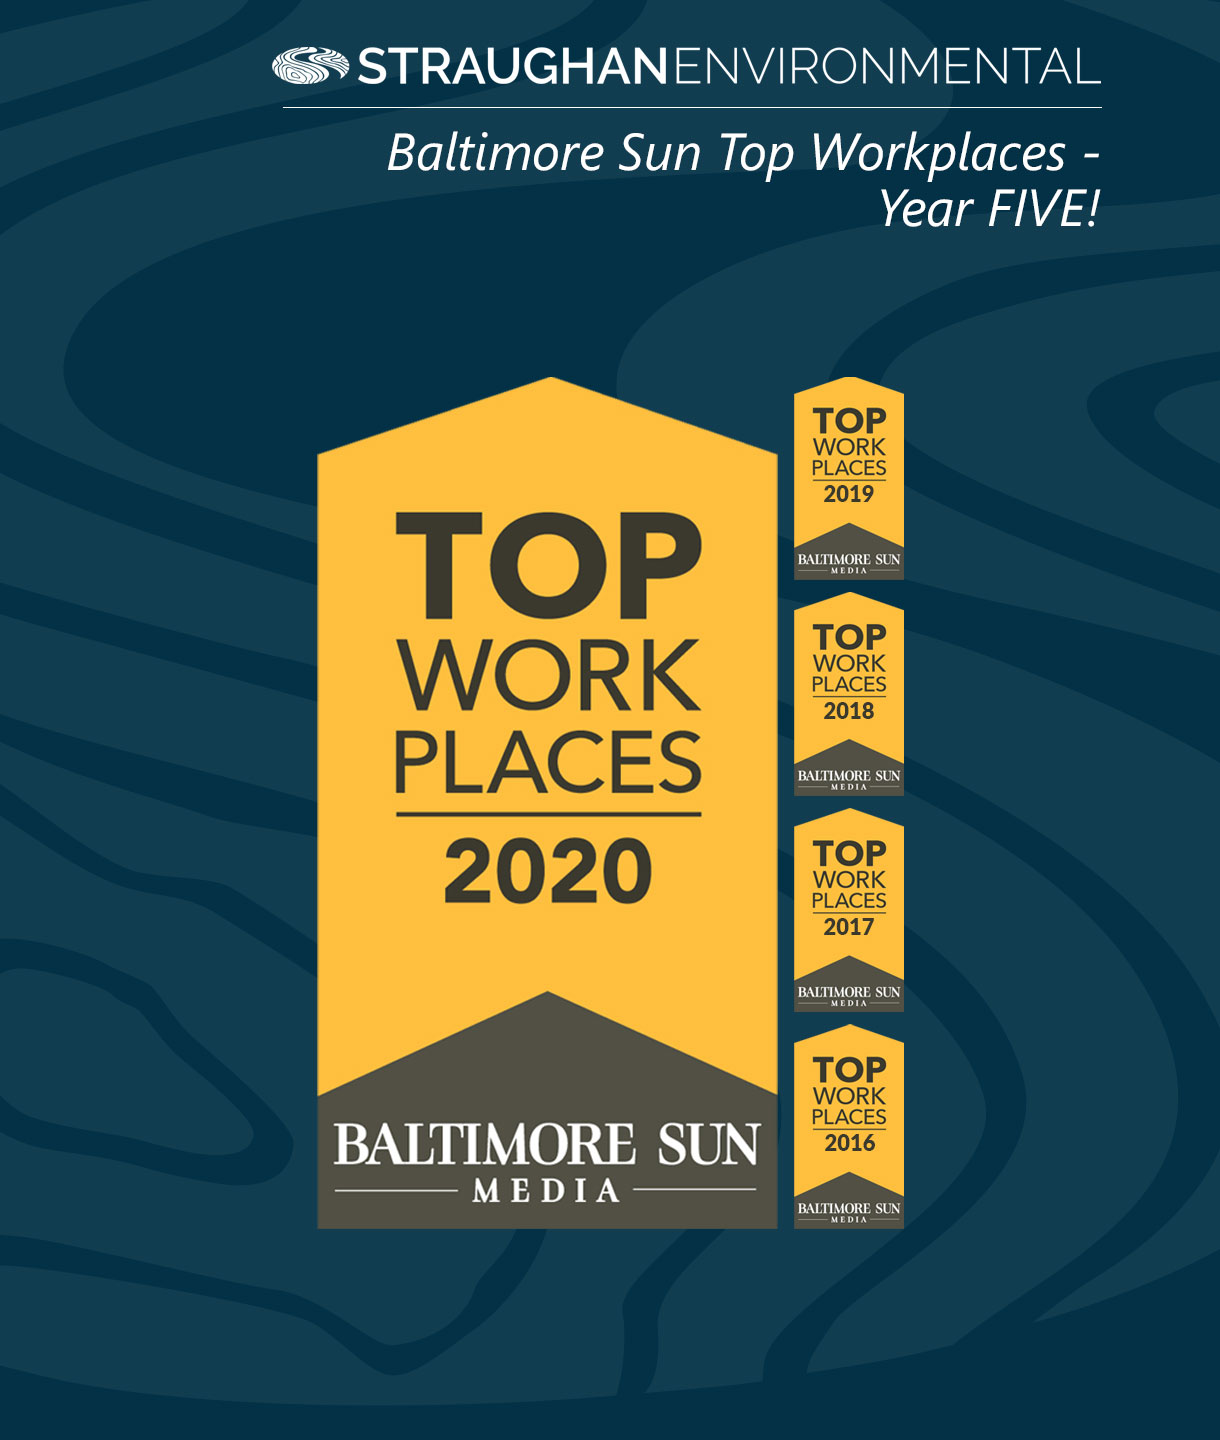 Baltimore Sun’s Top Workplaces Year 5! Straughan Environmental, Inc.